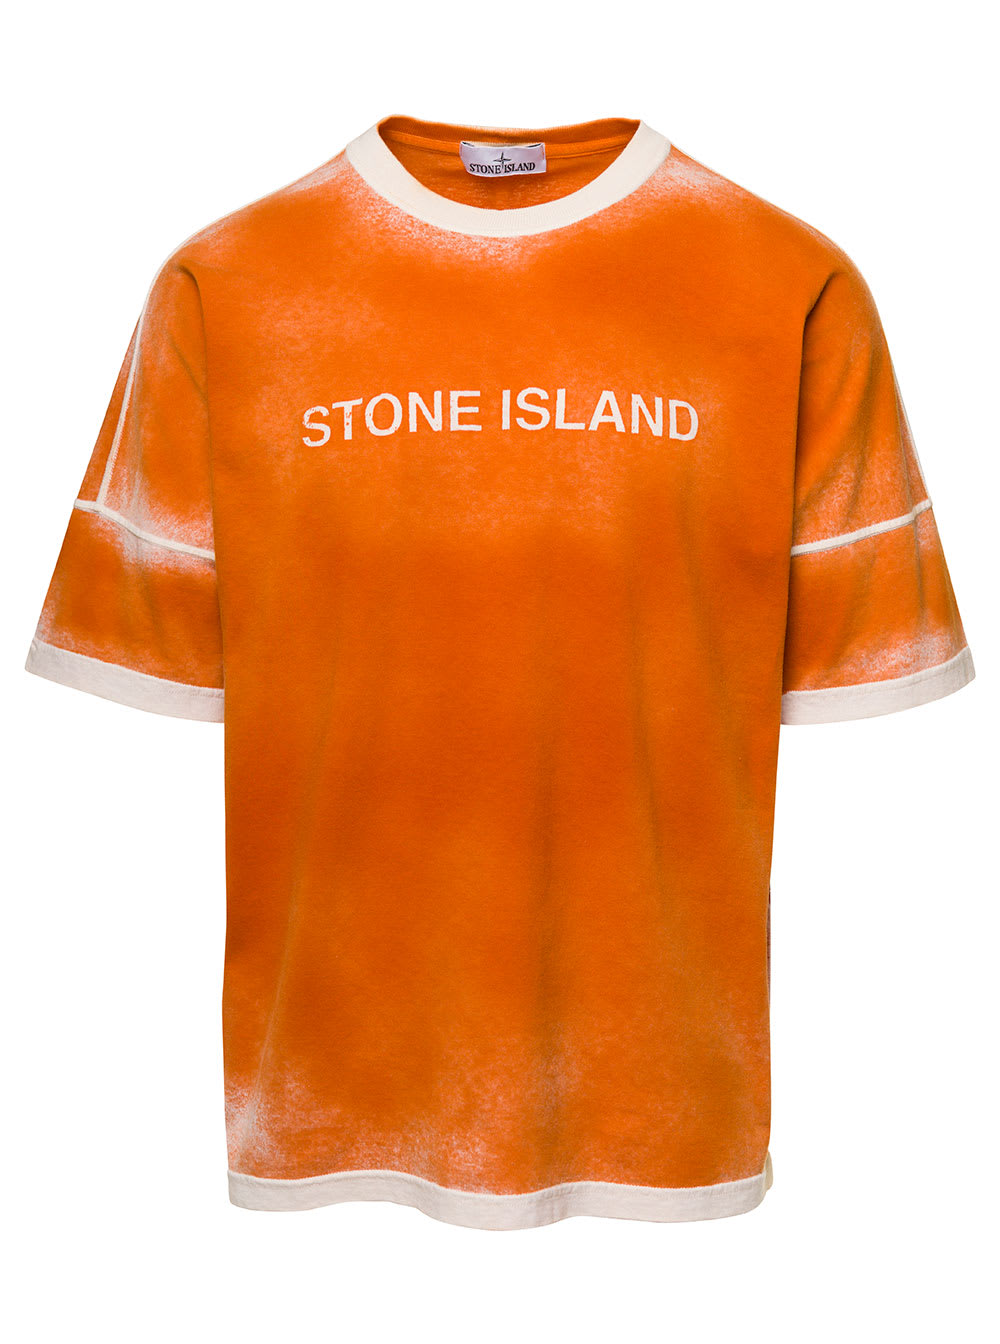 Stone Island Orange T-Shirt With Logo Print And Fade Effect In Cotton Man